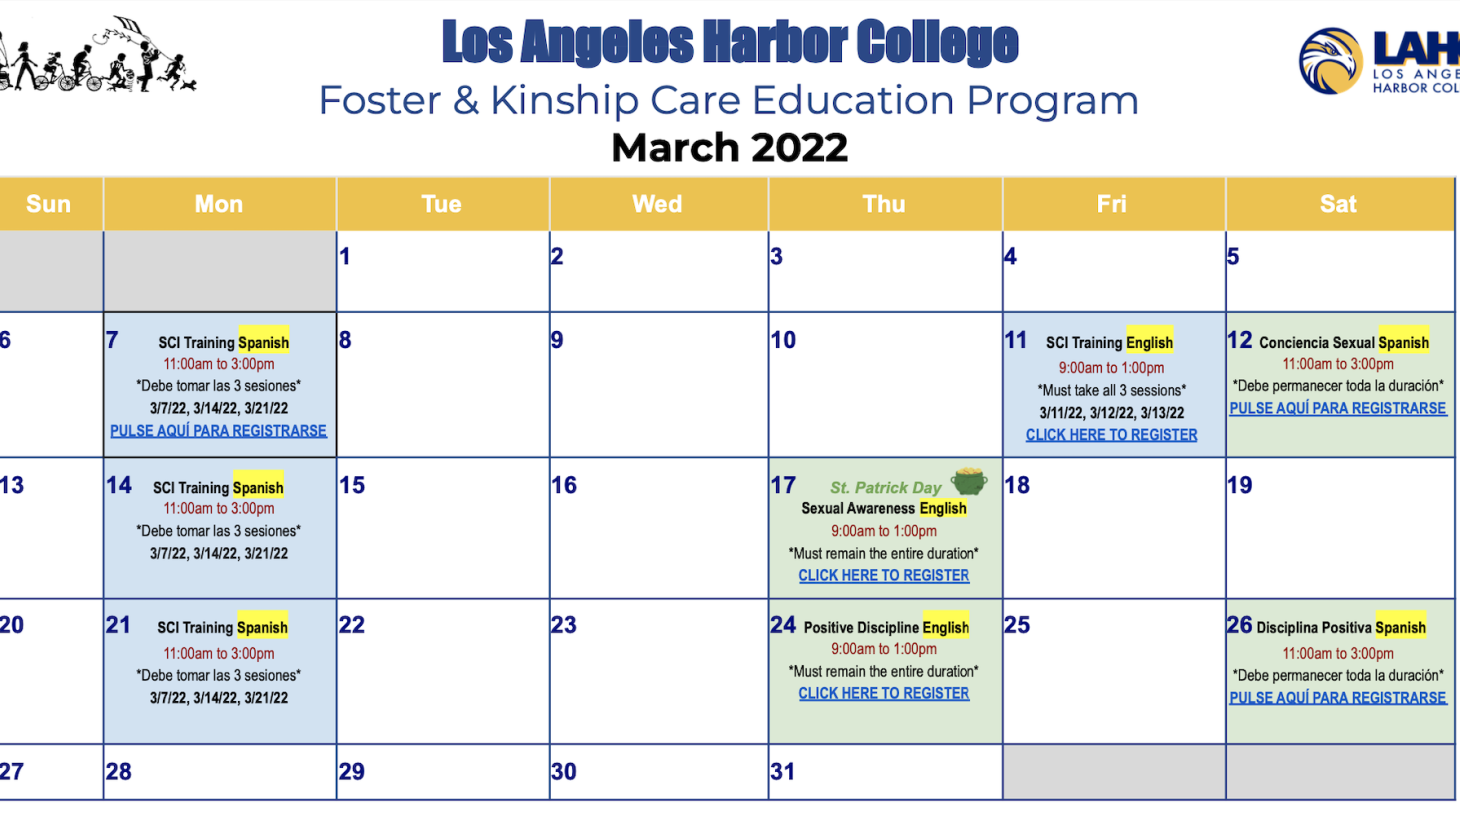 March Calendar of Foster and Kinship Care Program